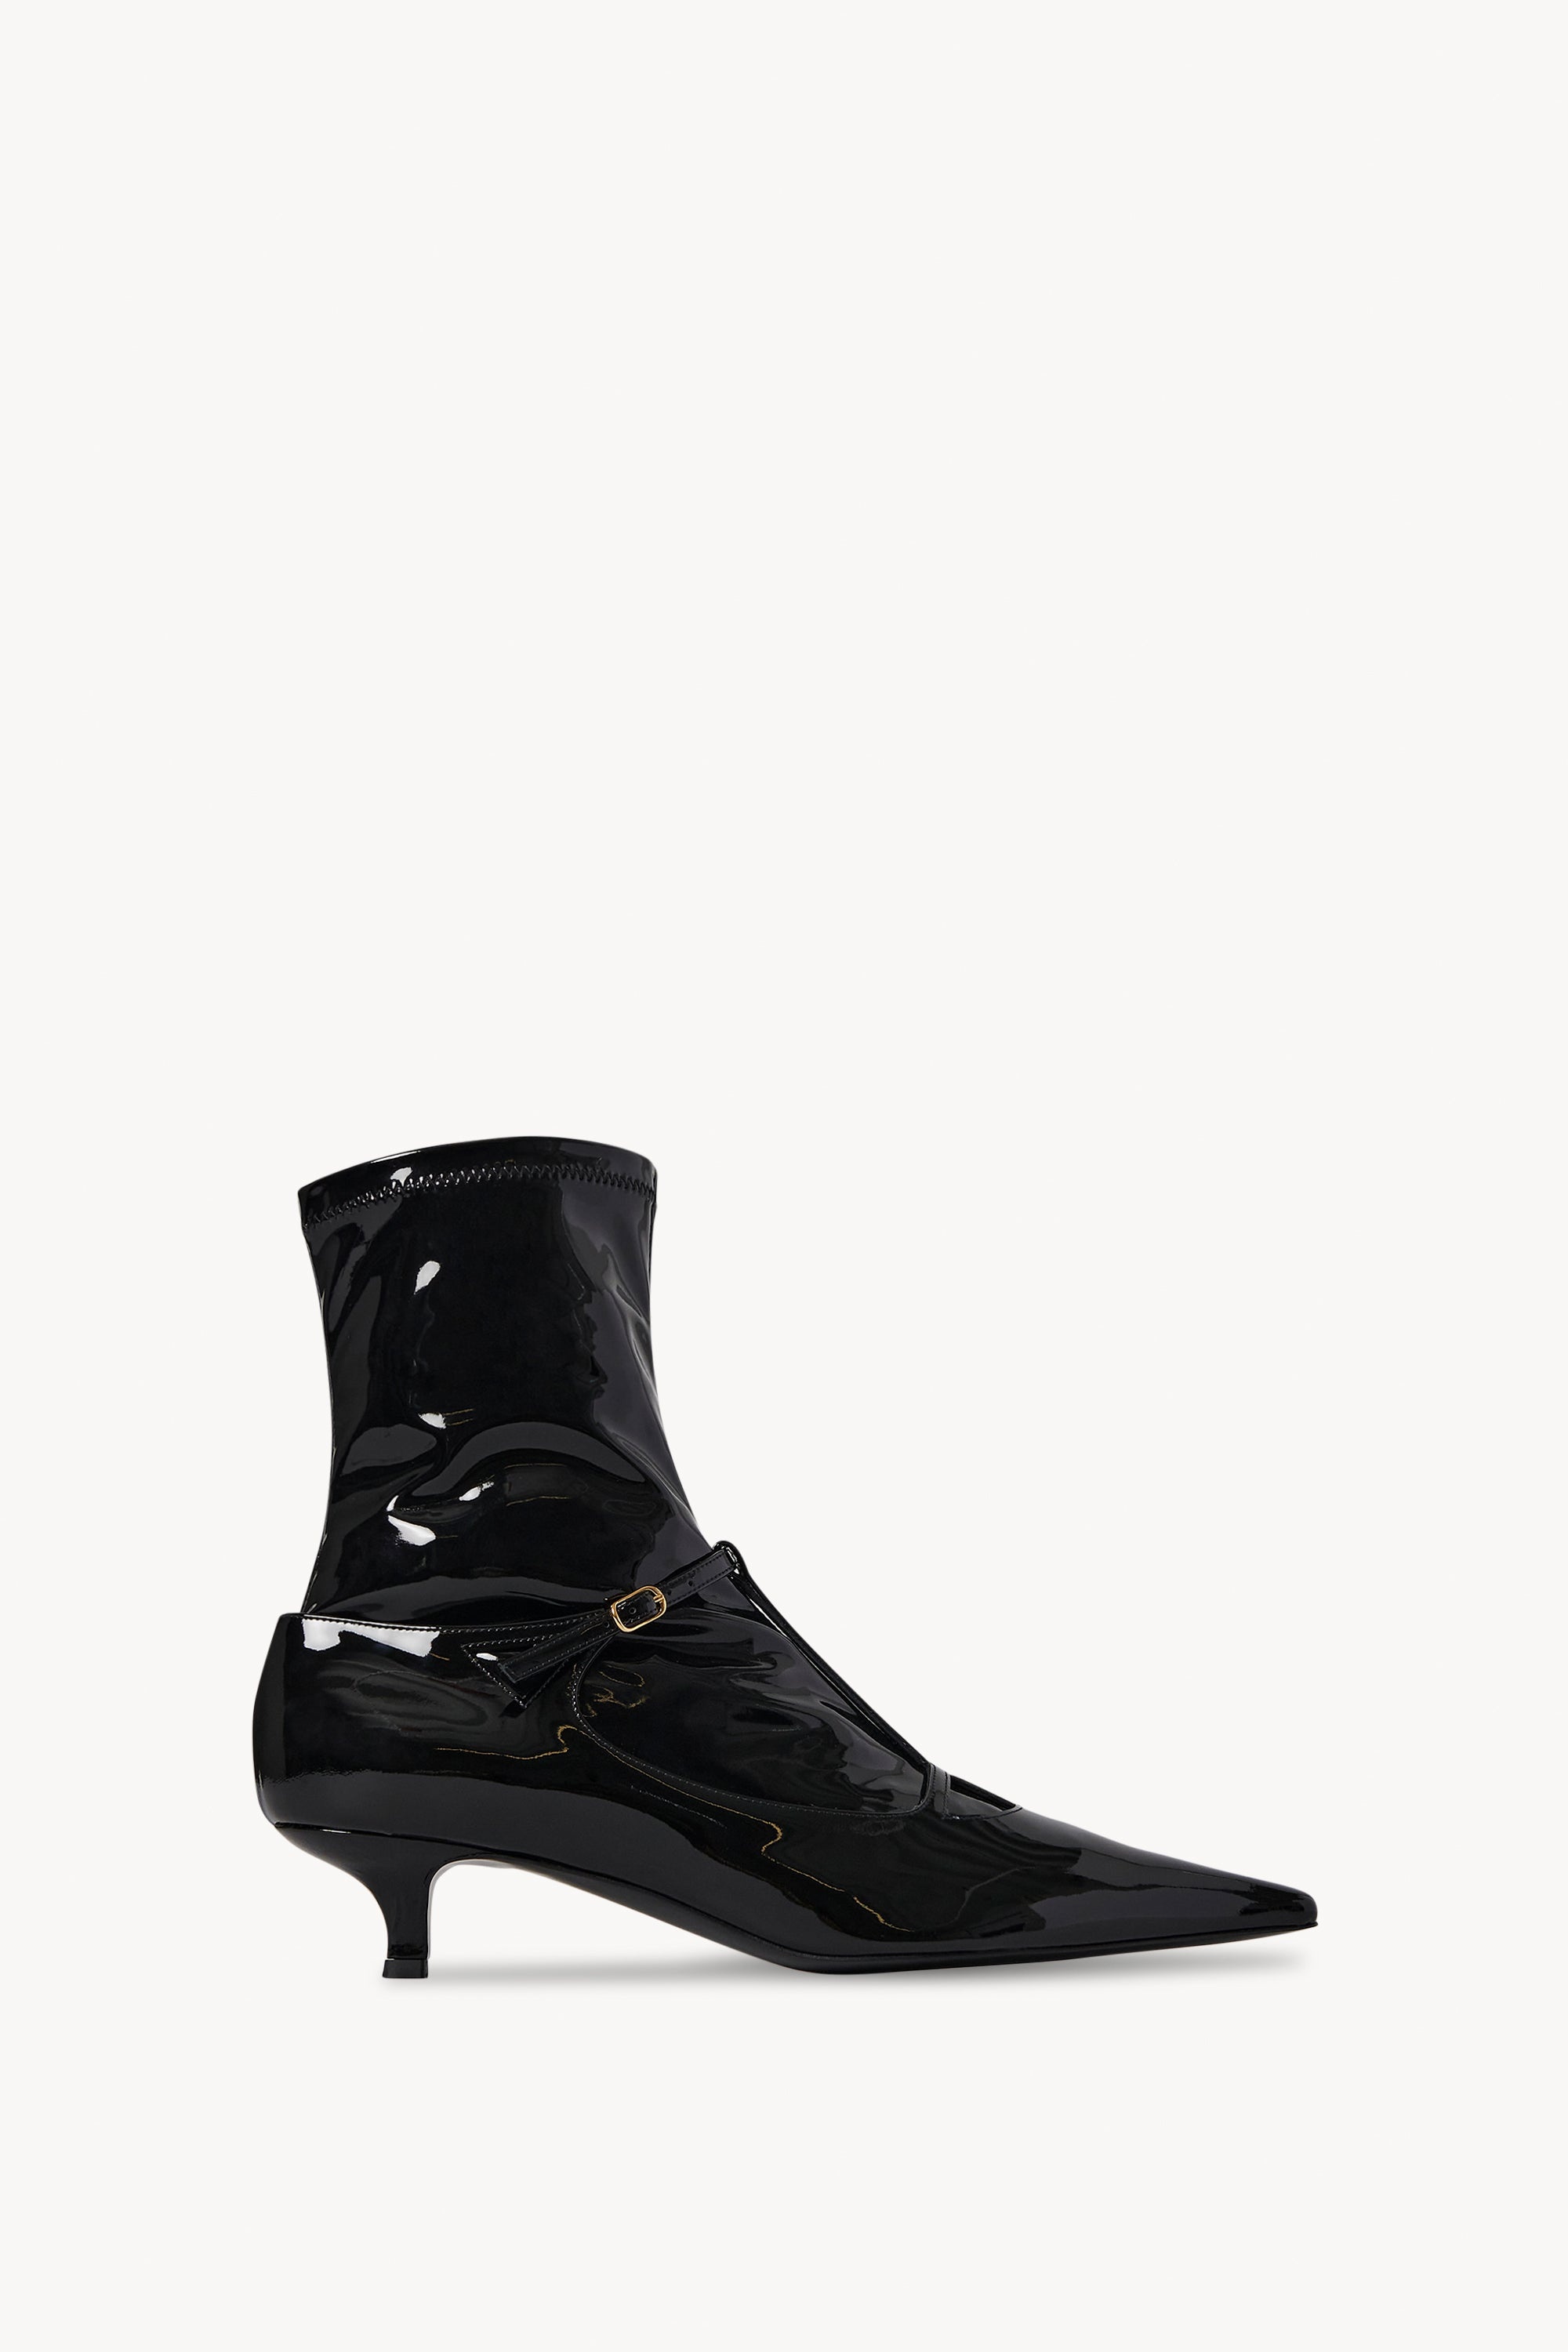 Cyd Boot in Patent Leather - 1